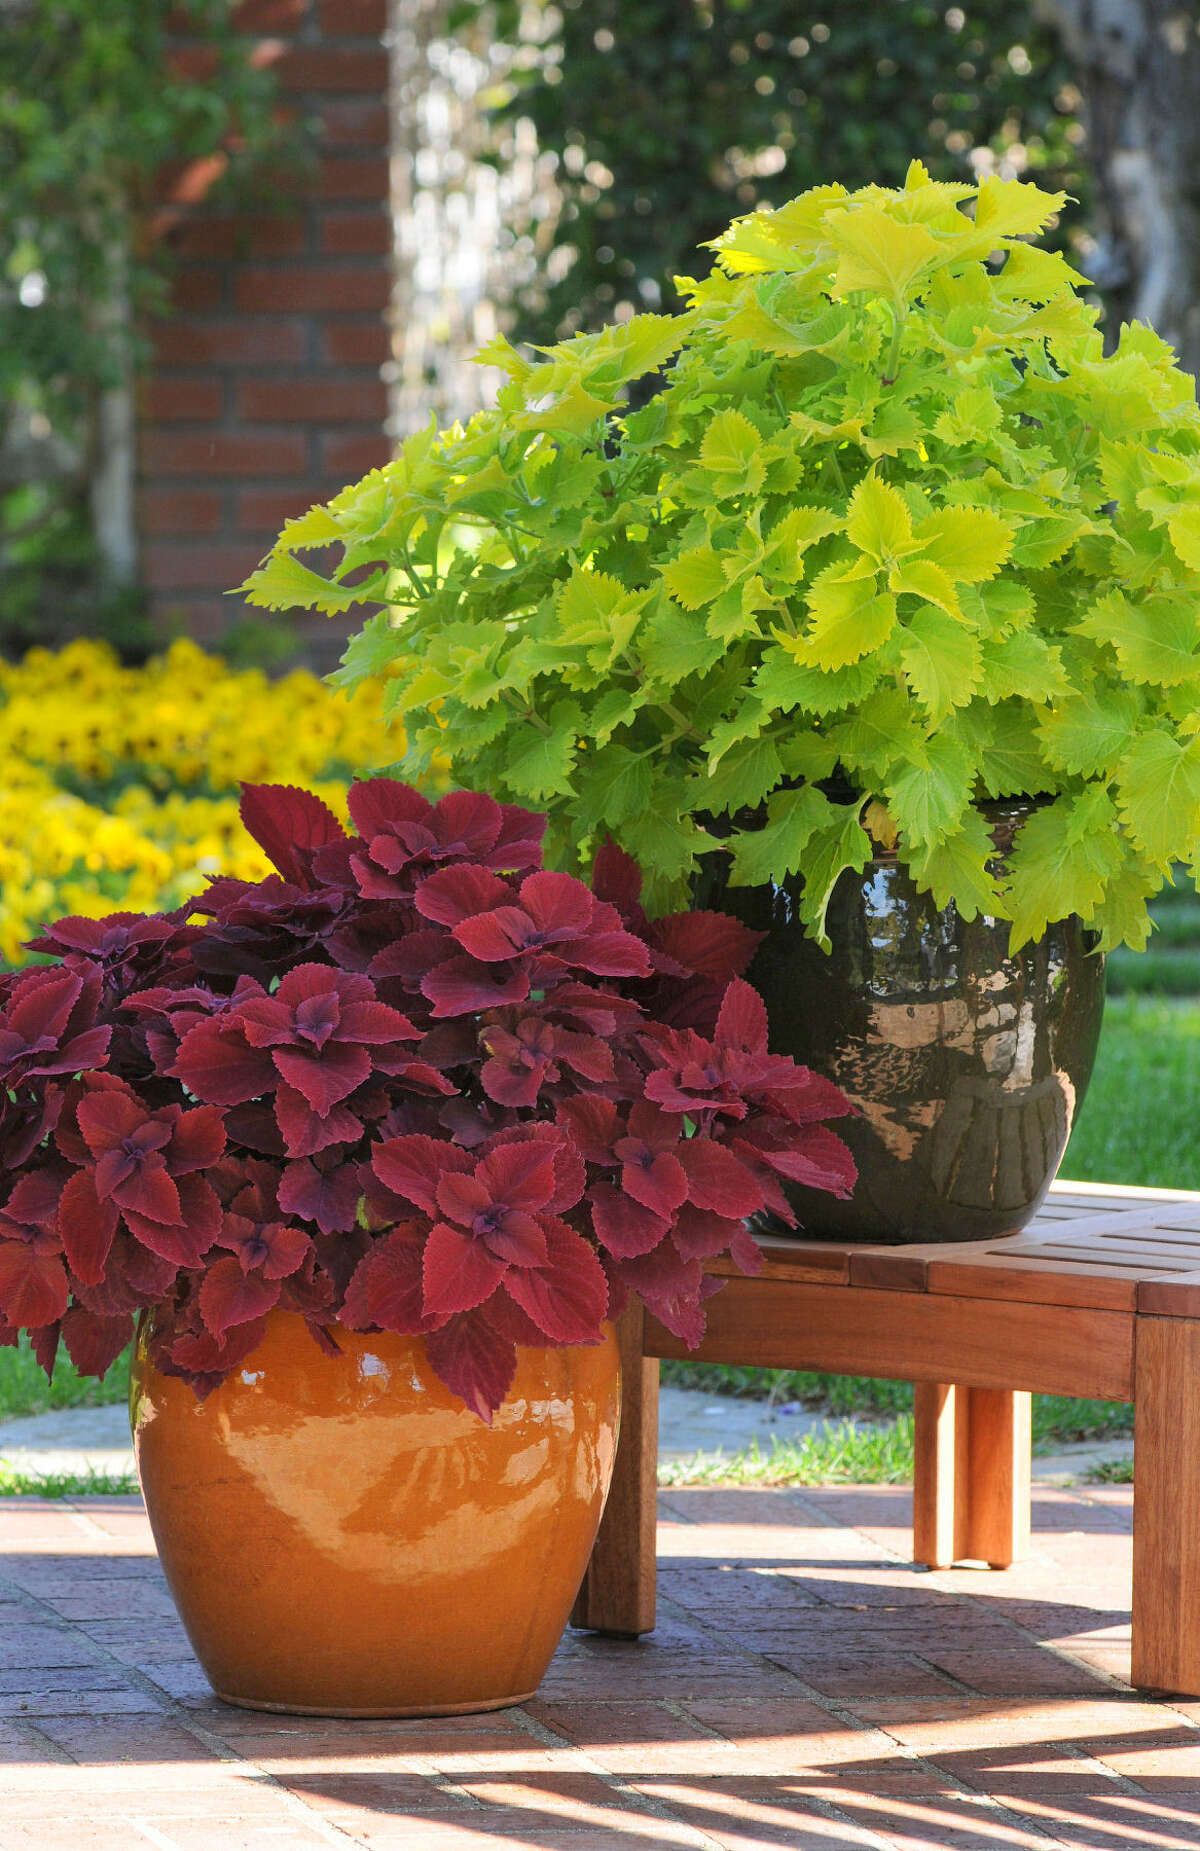 Coleus foliage varies from vibrant chartreuse to deep burgundy. The plants tolerate sun or shade, depending on the variety.